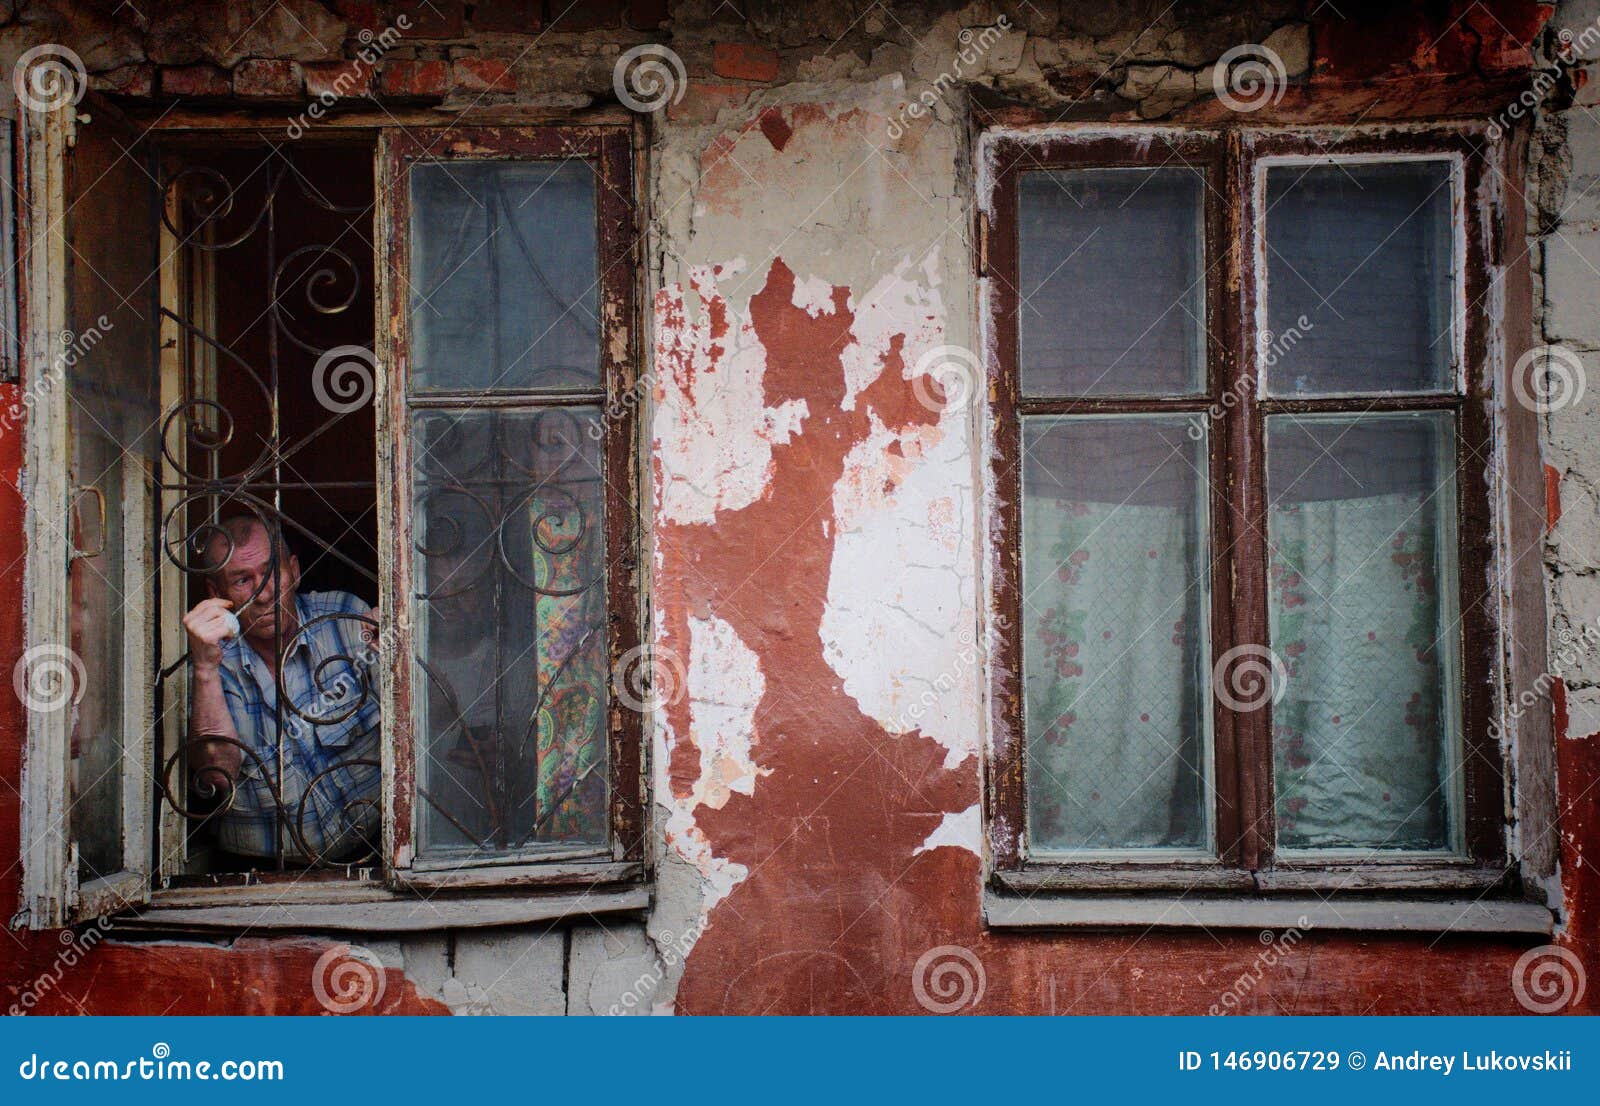 A Man in a Poor Quarter Looking Out the Window of an Old House ...